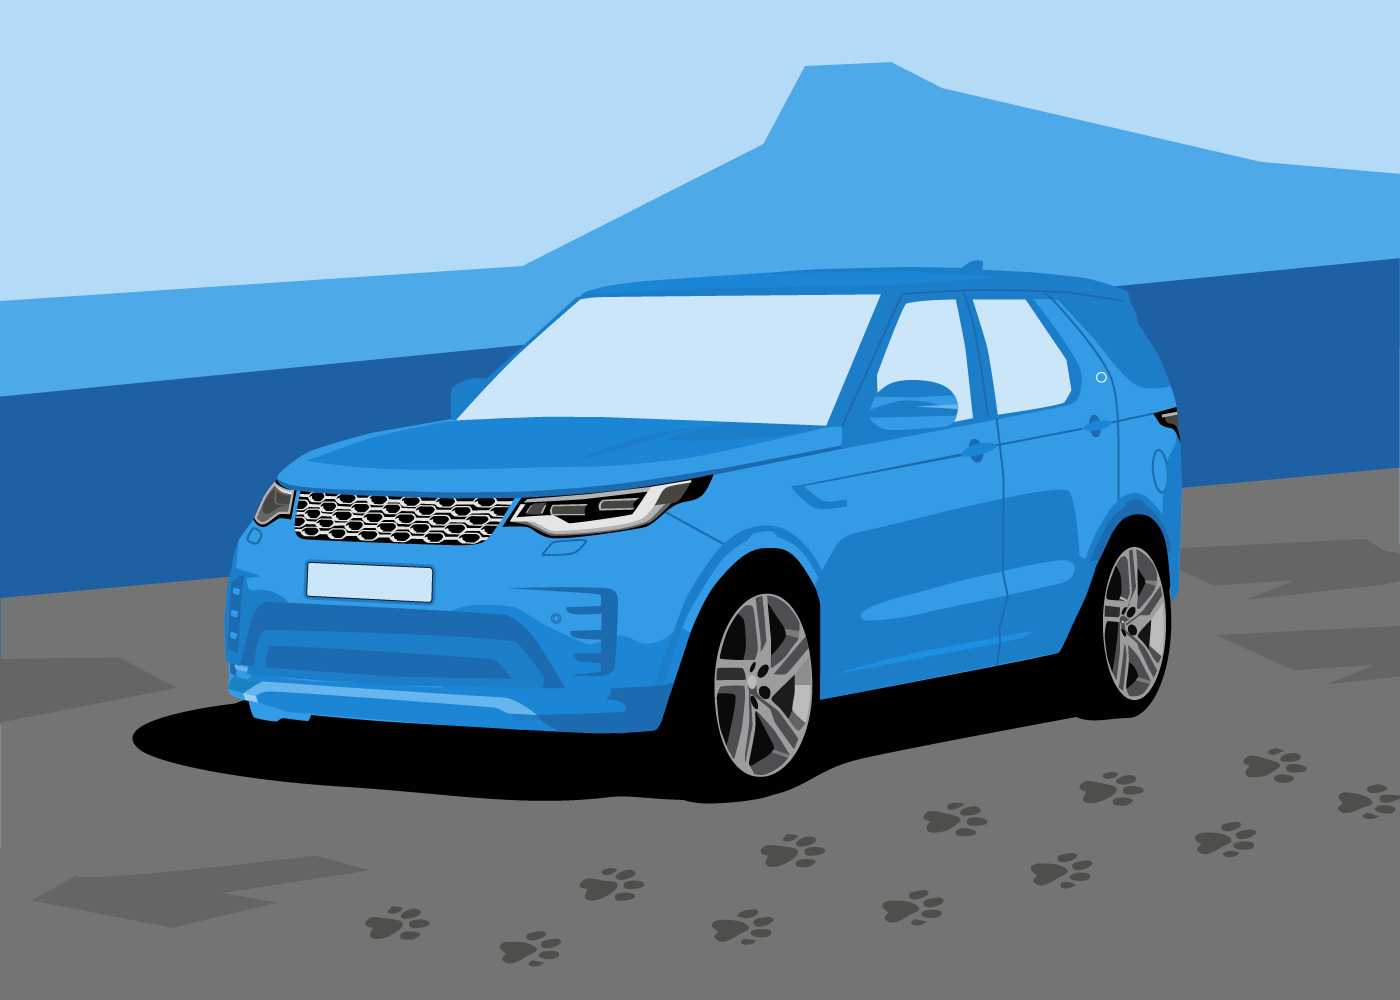 Illustration of large SUV car with paw prints on the ground